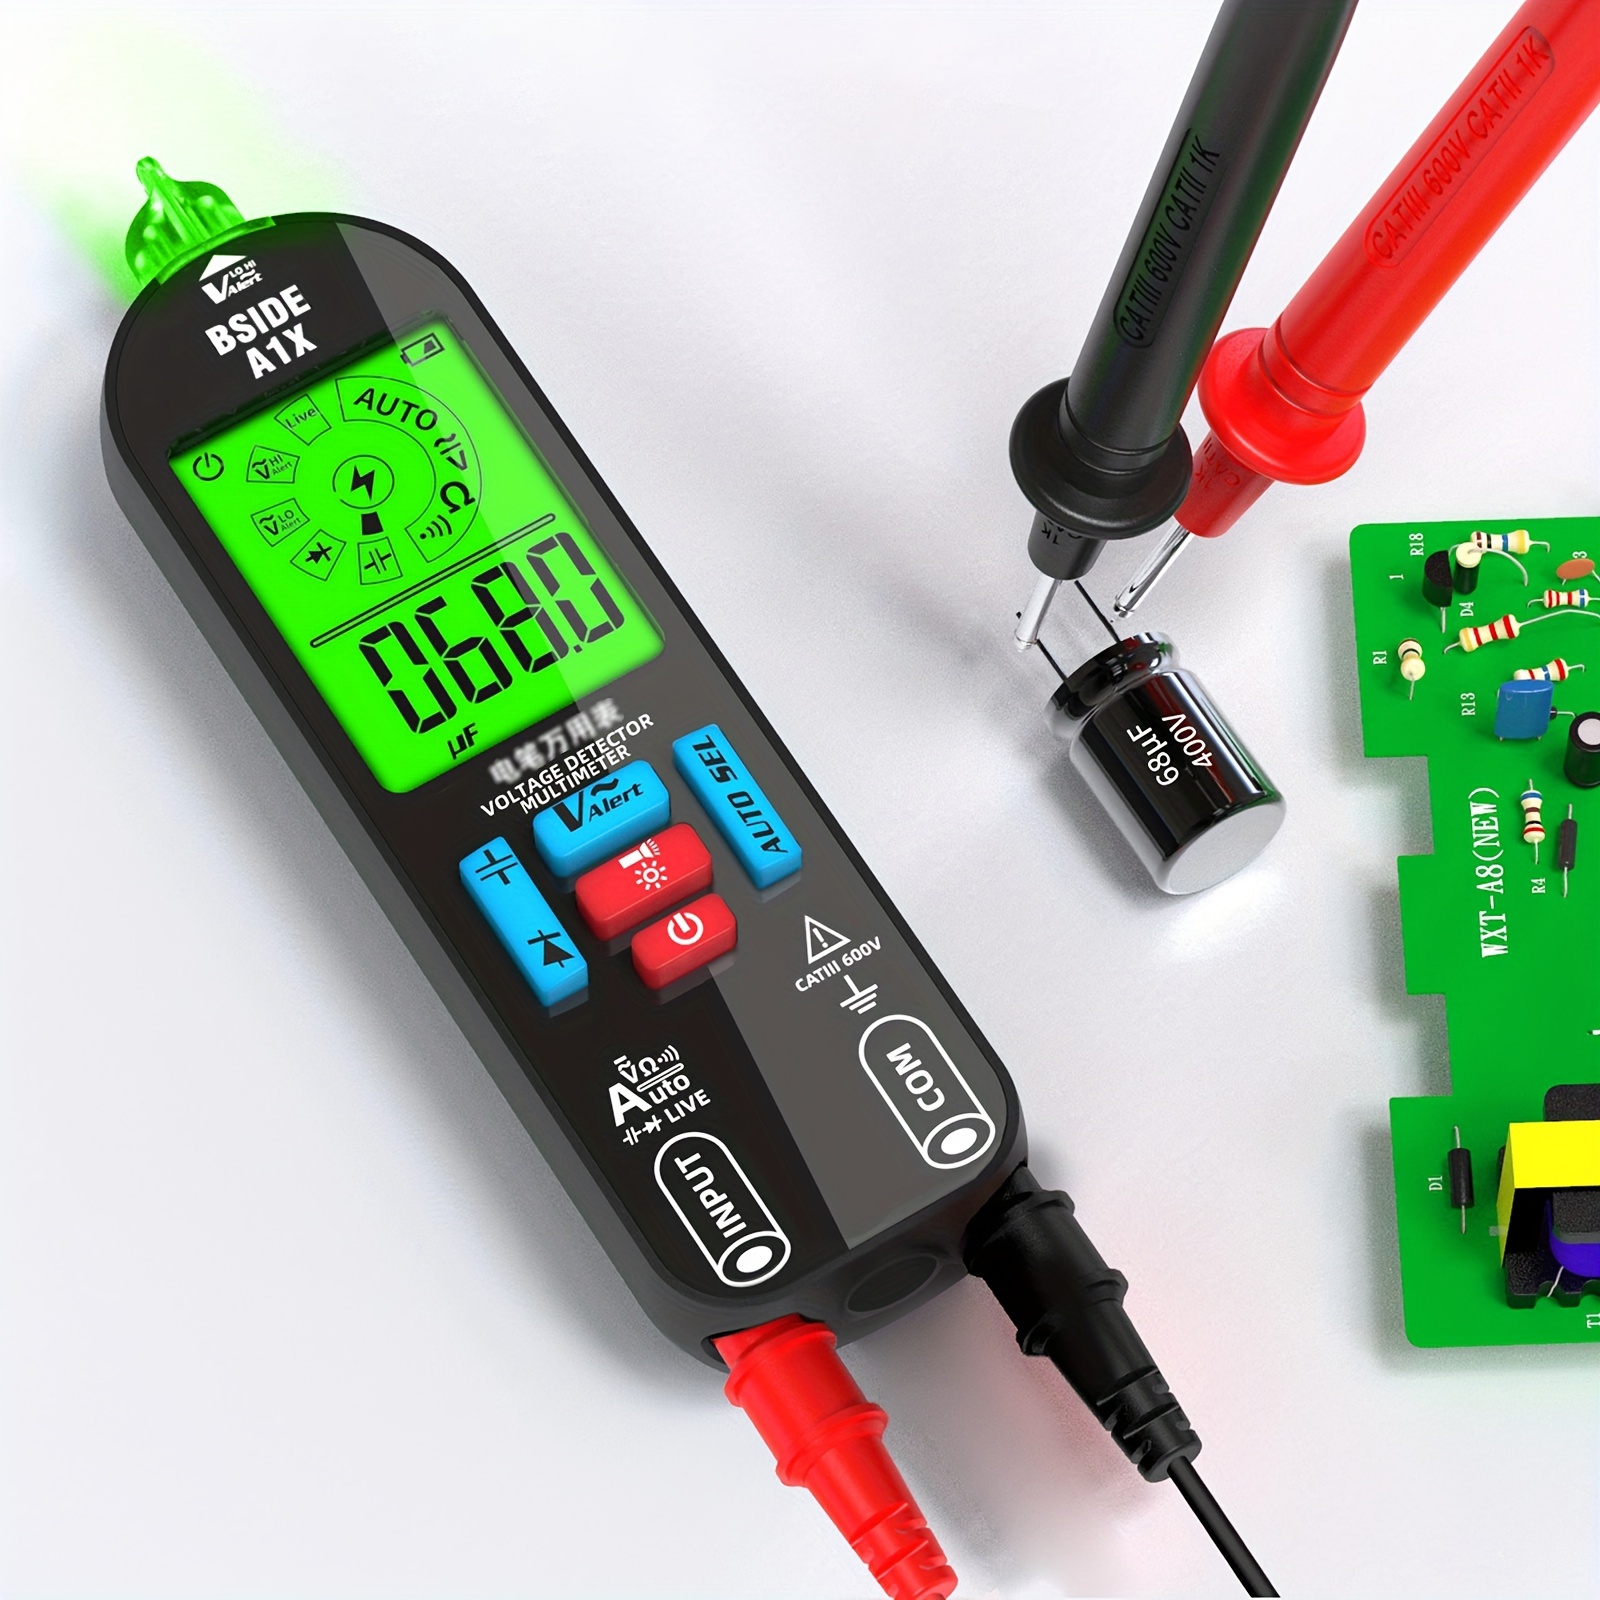 

A1x Smart Digital Multimeter - Rechargeable, High-precision Voltmeter & Ohm Meter With Non-contact Testing For Ac/dc, Resistance, Continuity, Diode, Temperature - Red & Green Backlit Display